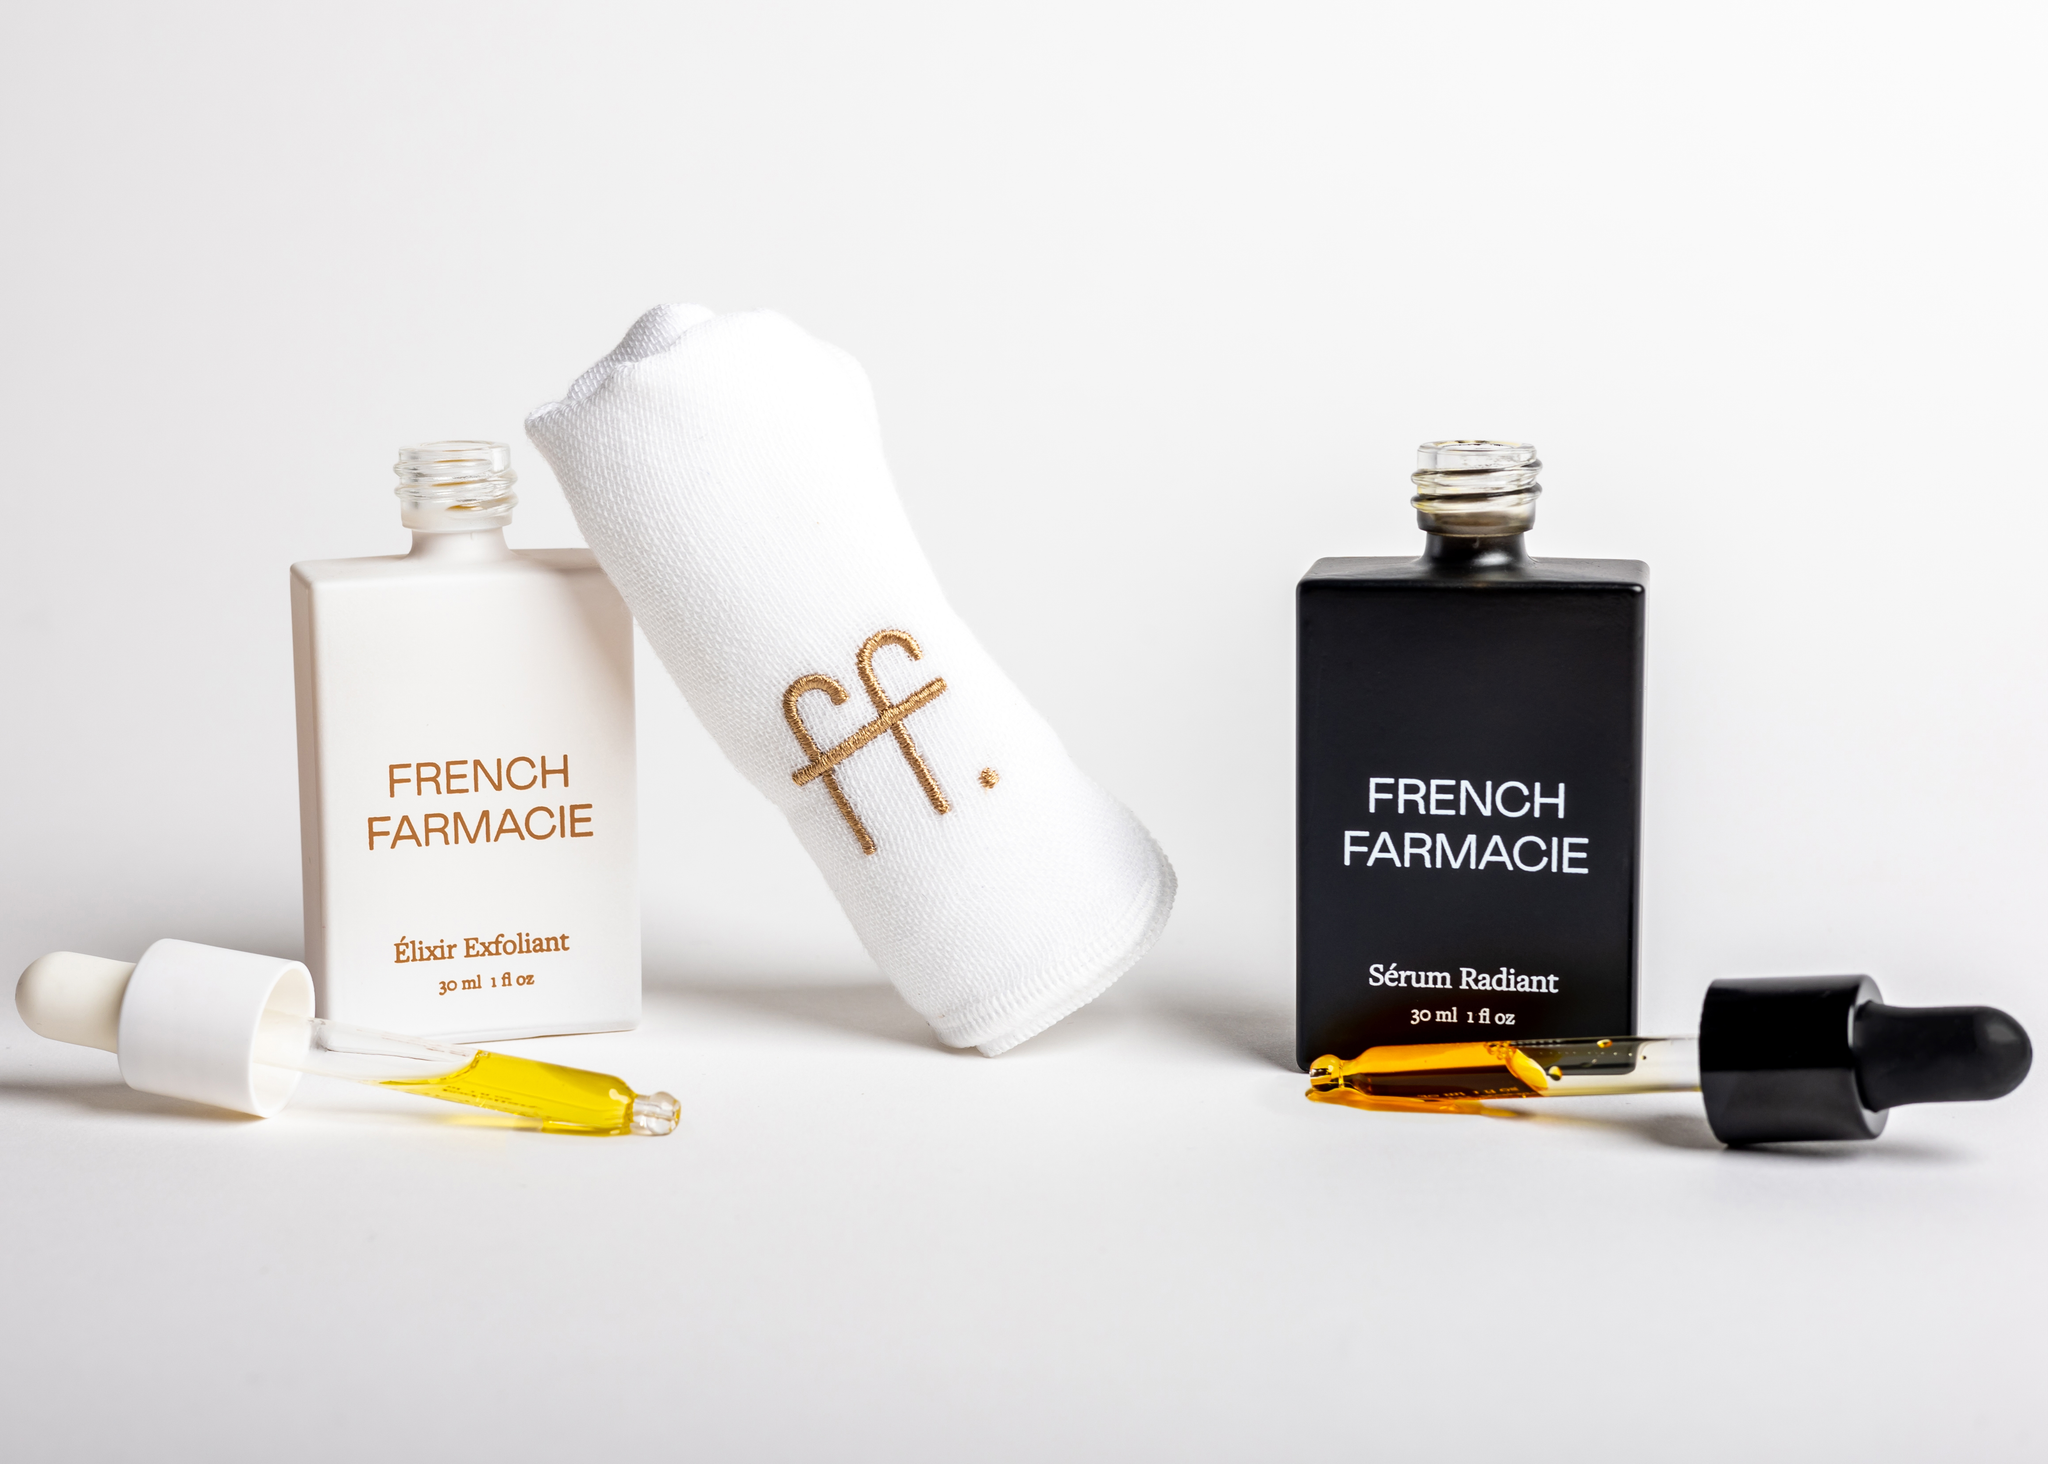 French Farmacie's Élixir Exfoliant and Sérum Radiant with droppers and branded towel